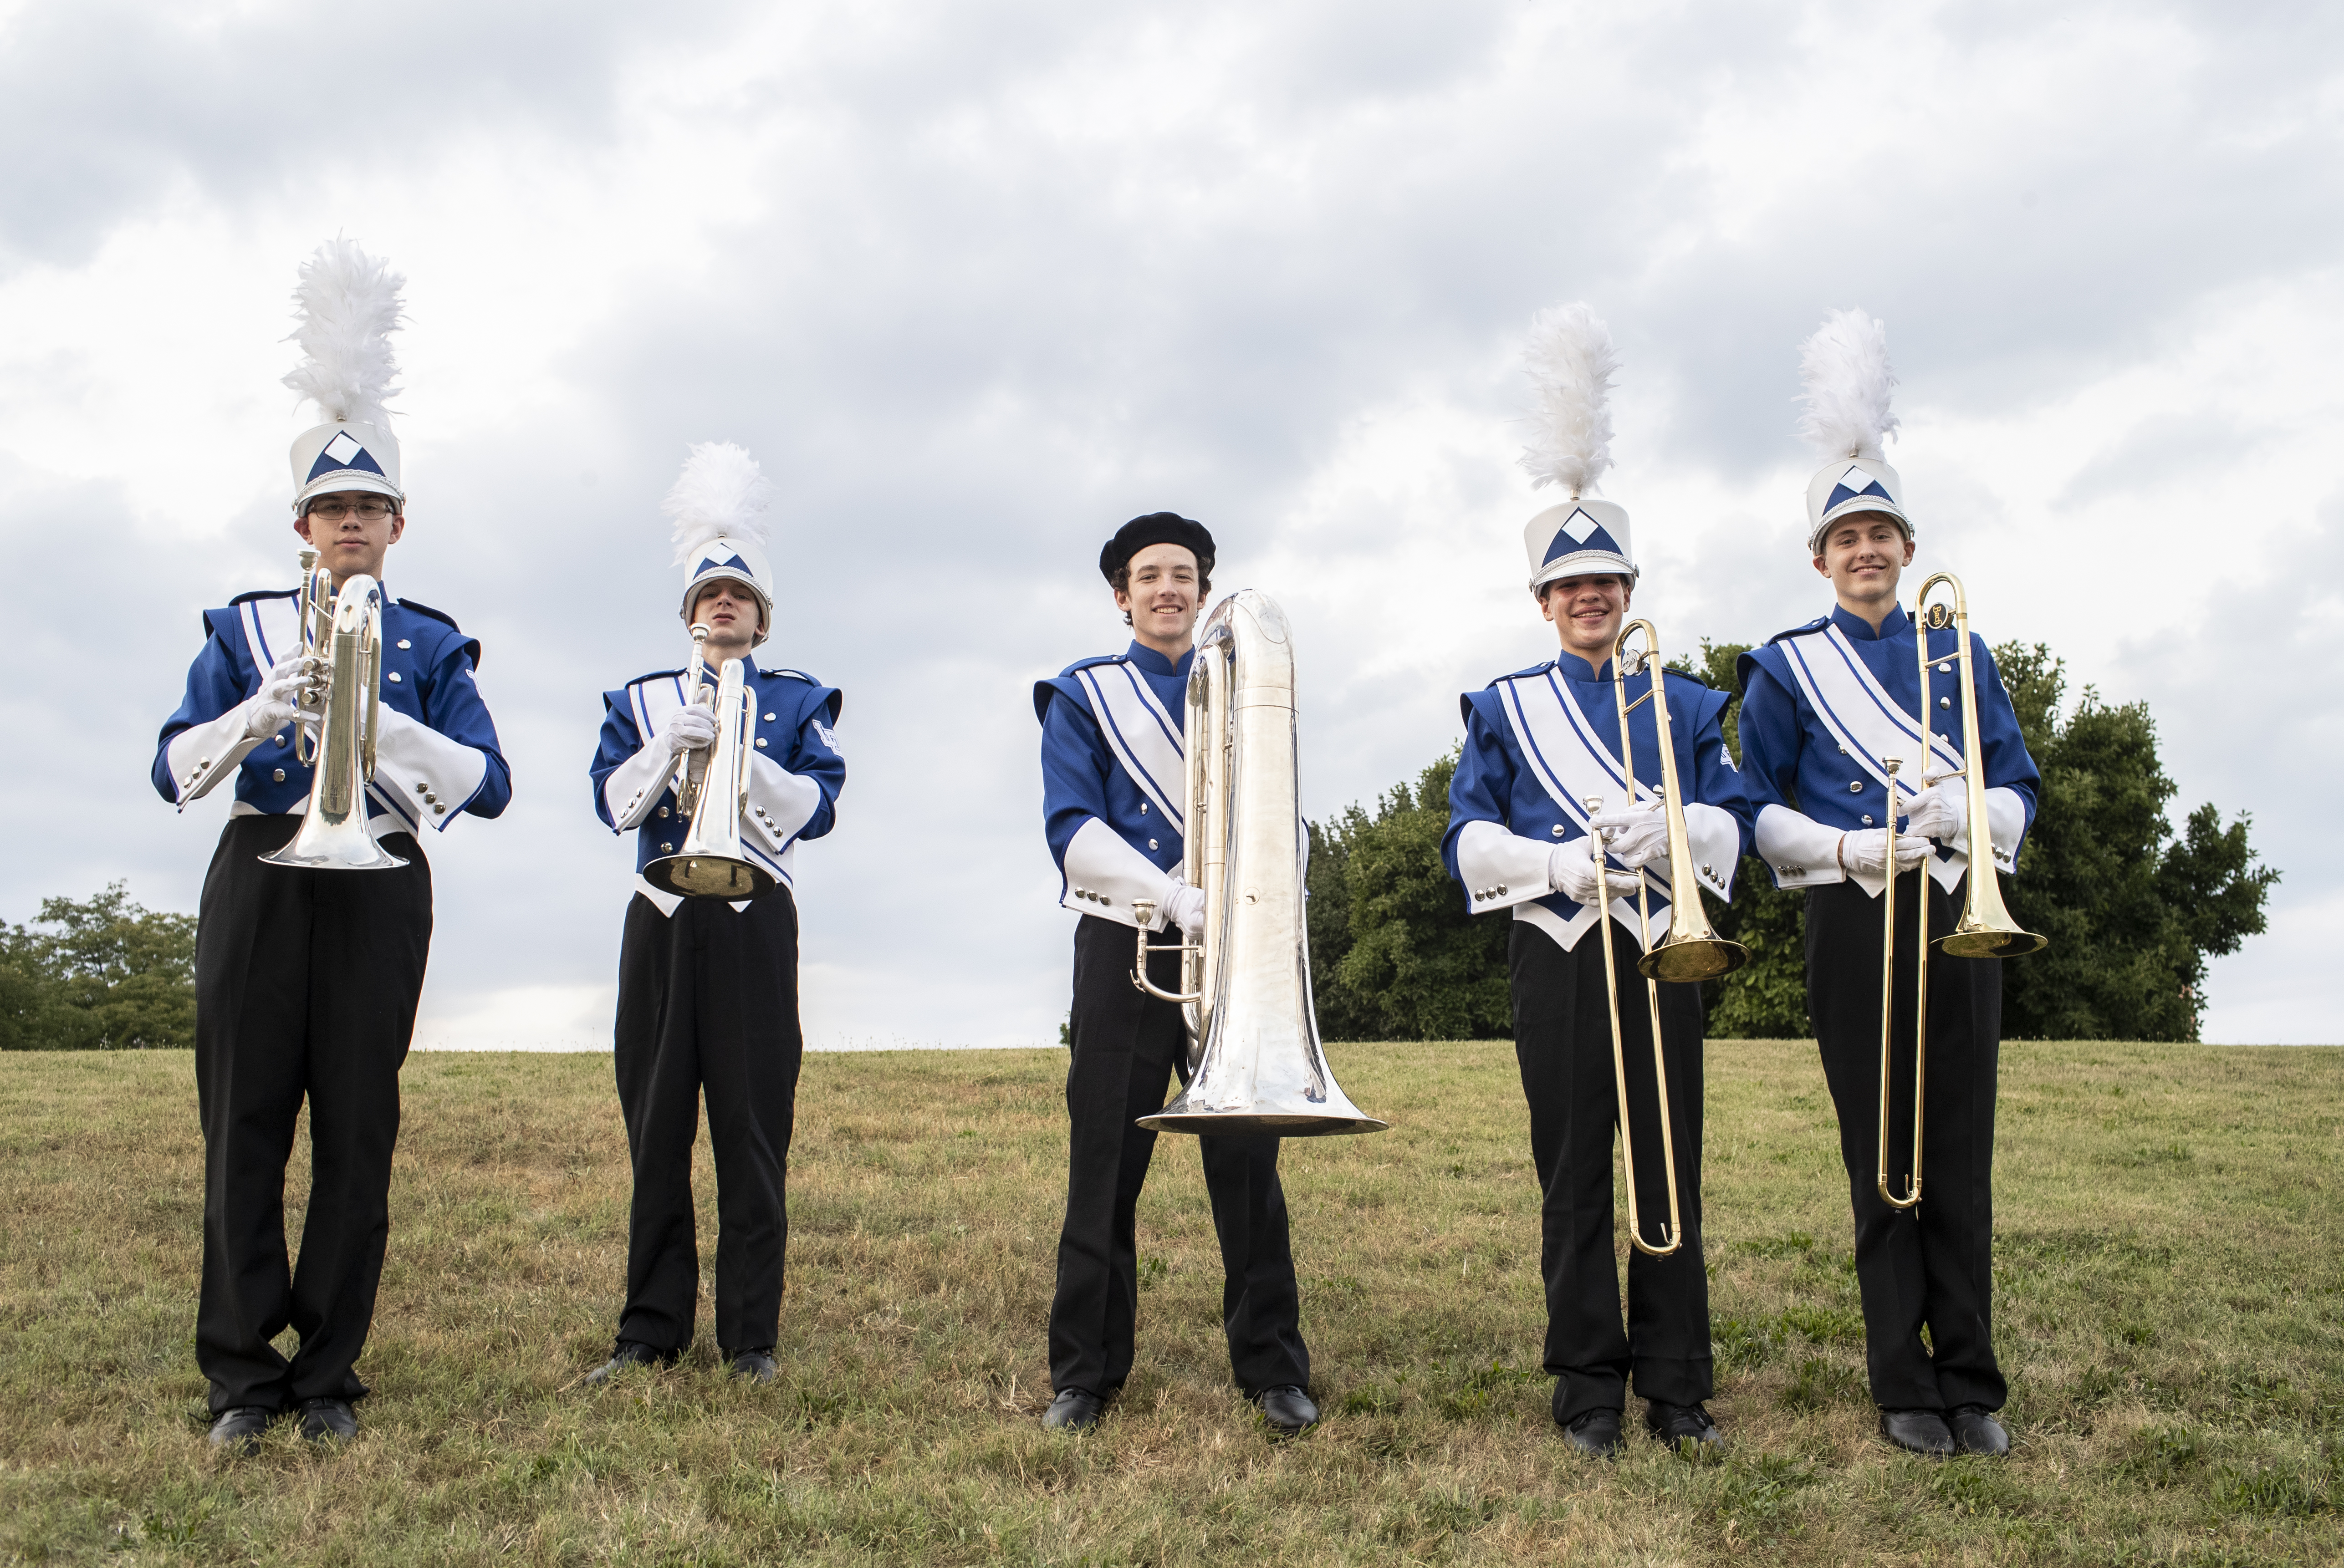 The Lower Dauphin High School marching band.  August 25, 2022. Sean Simmers |ssimmers@pennlive.com